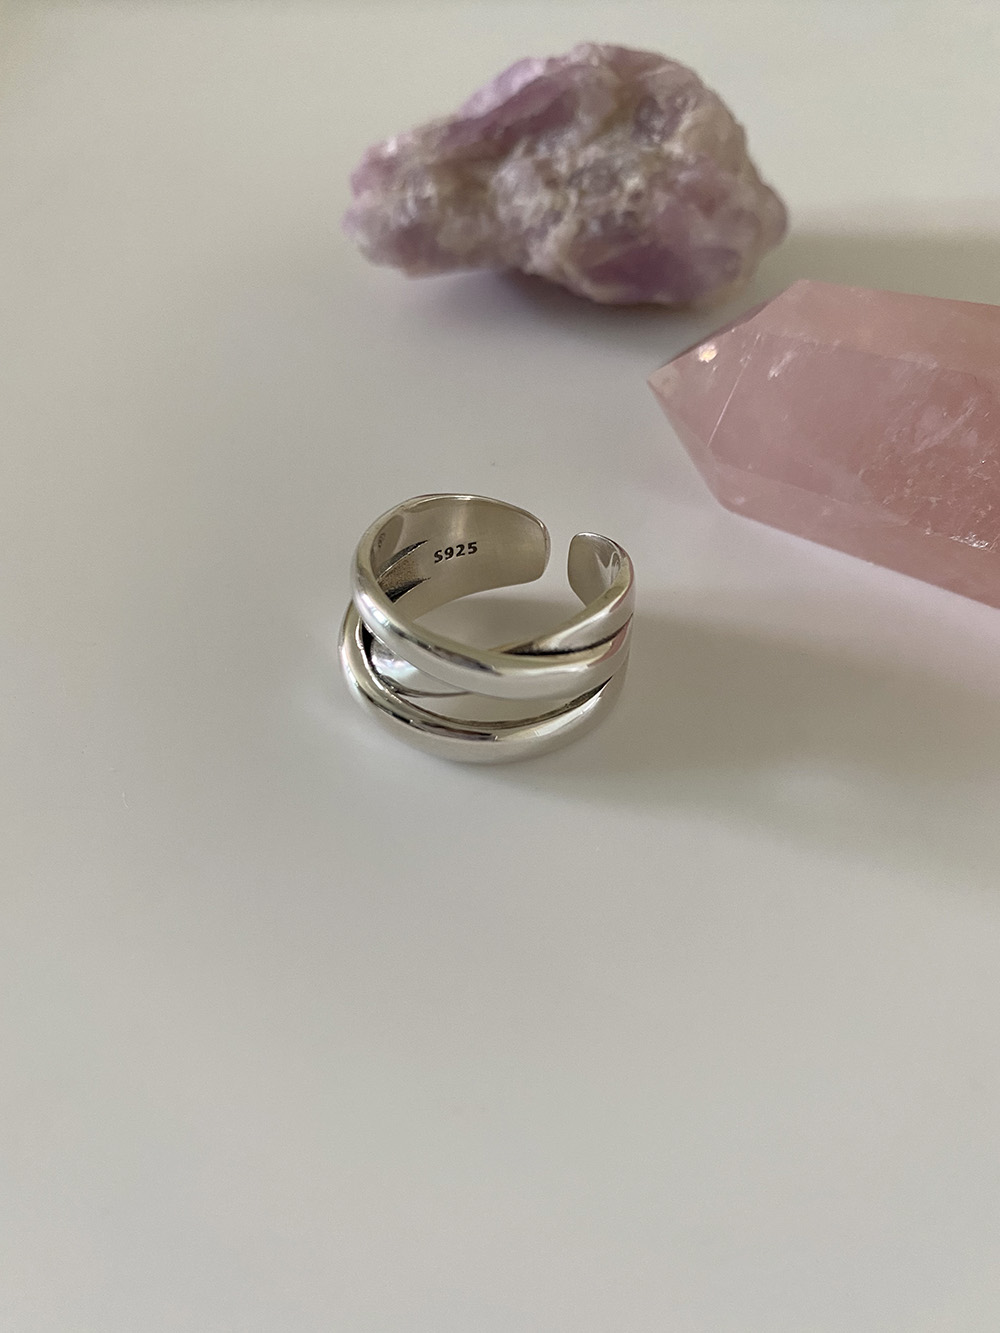 [92.5 silver] excaliber ring